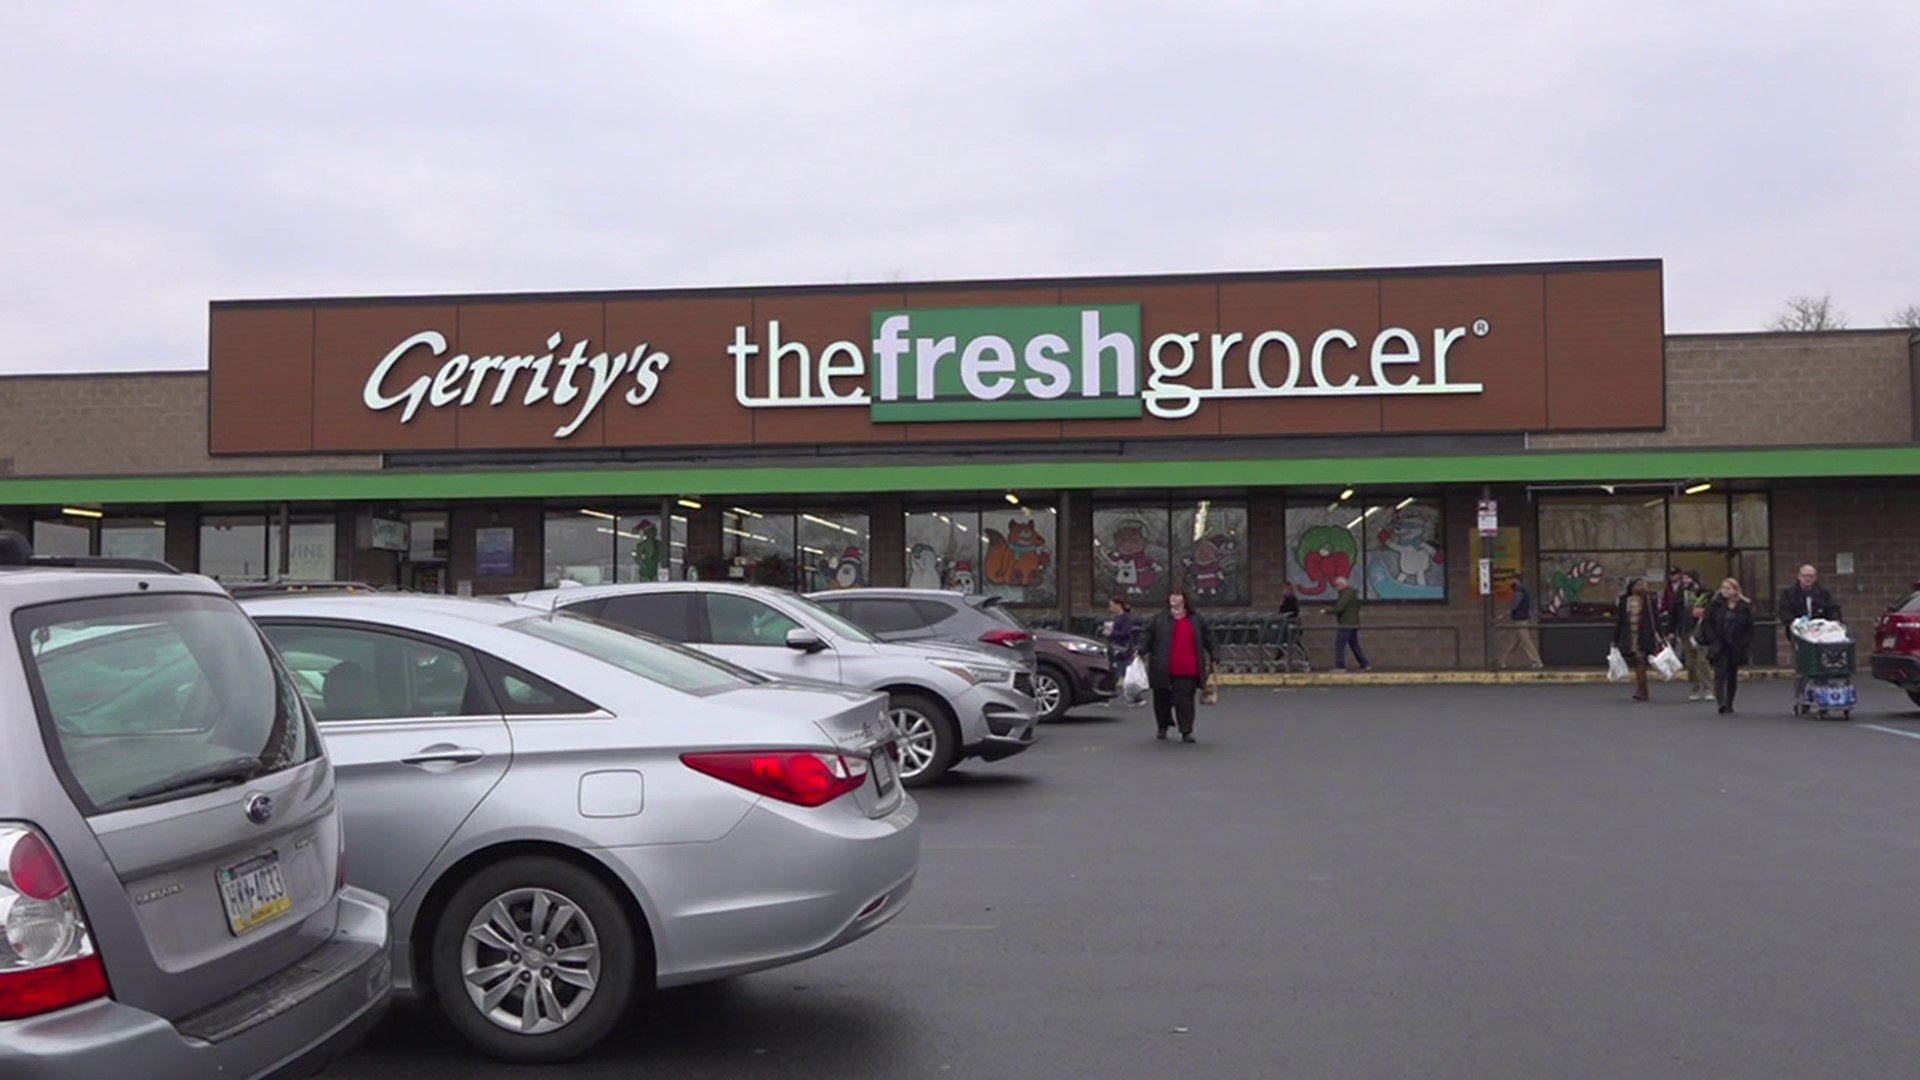 A steady flow of shoppers were heading in and out of Gerrity's the Fresh Grocer in Luzerne Sunday morning.